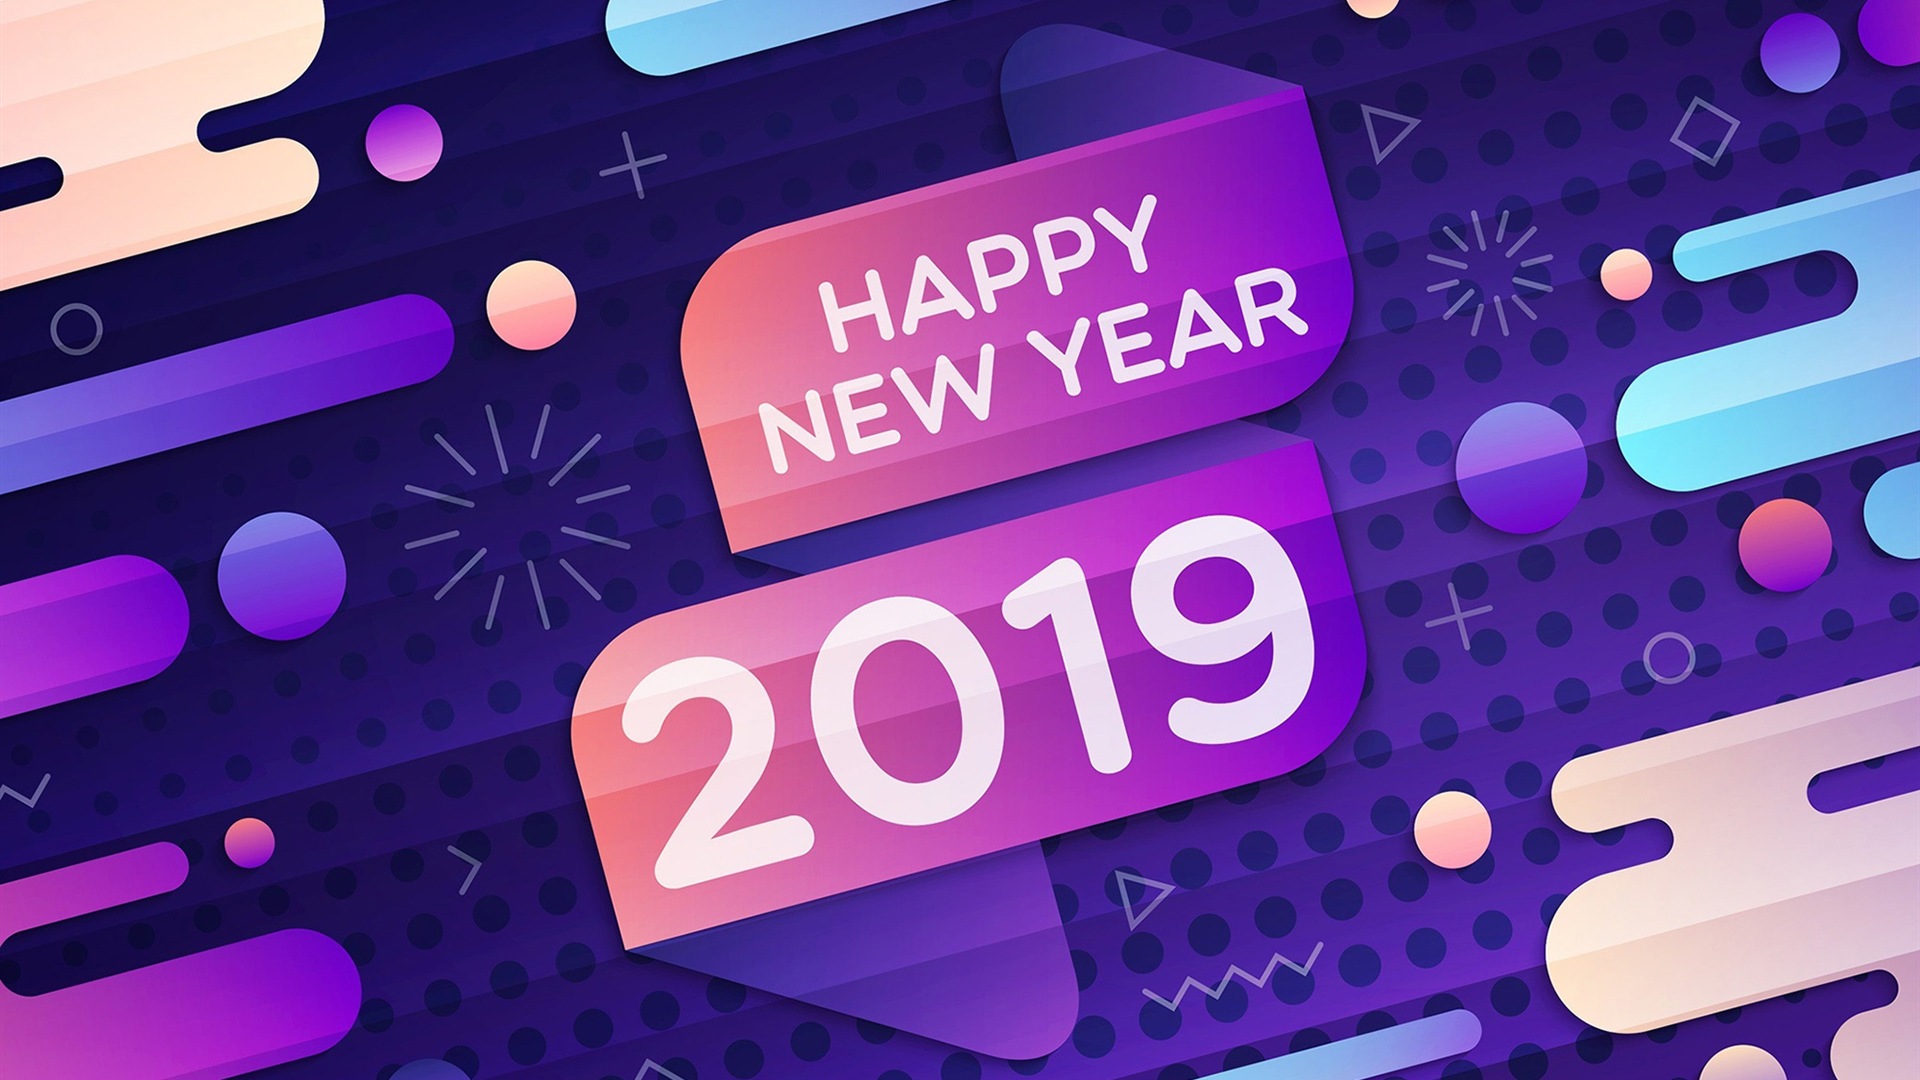 Happy New Year 2019 HD wallpapers #10 - 1920x1080